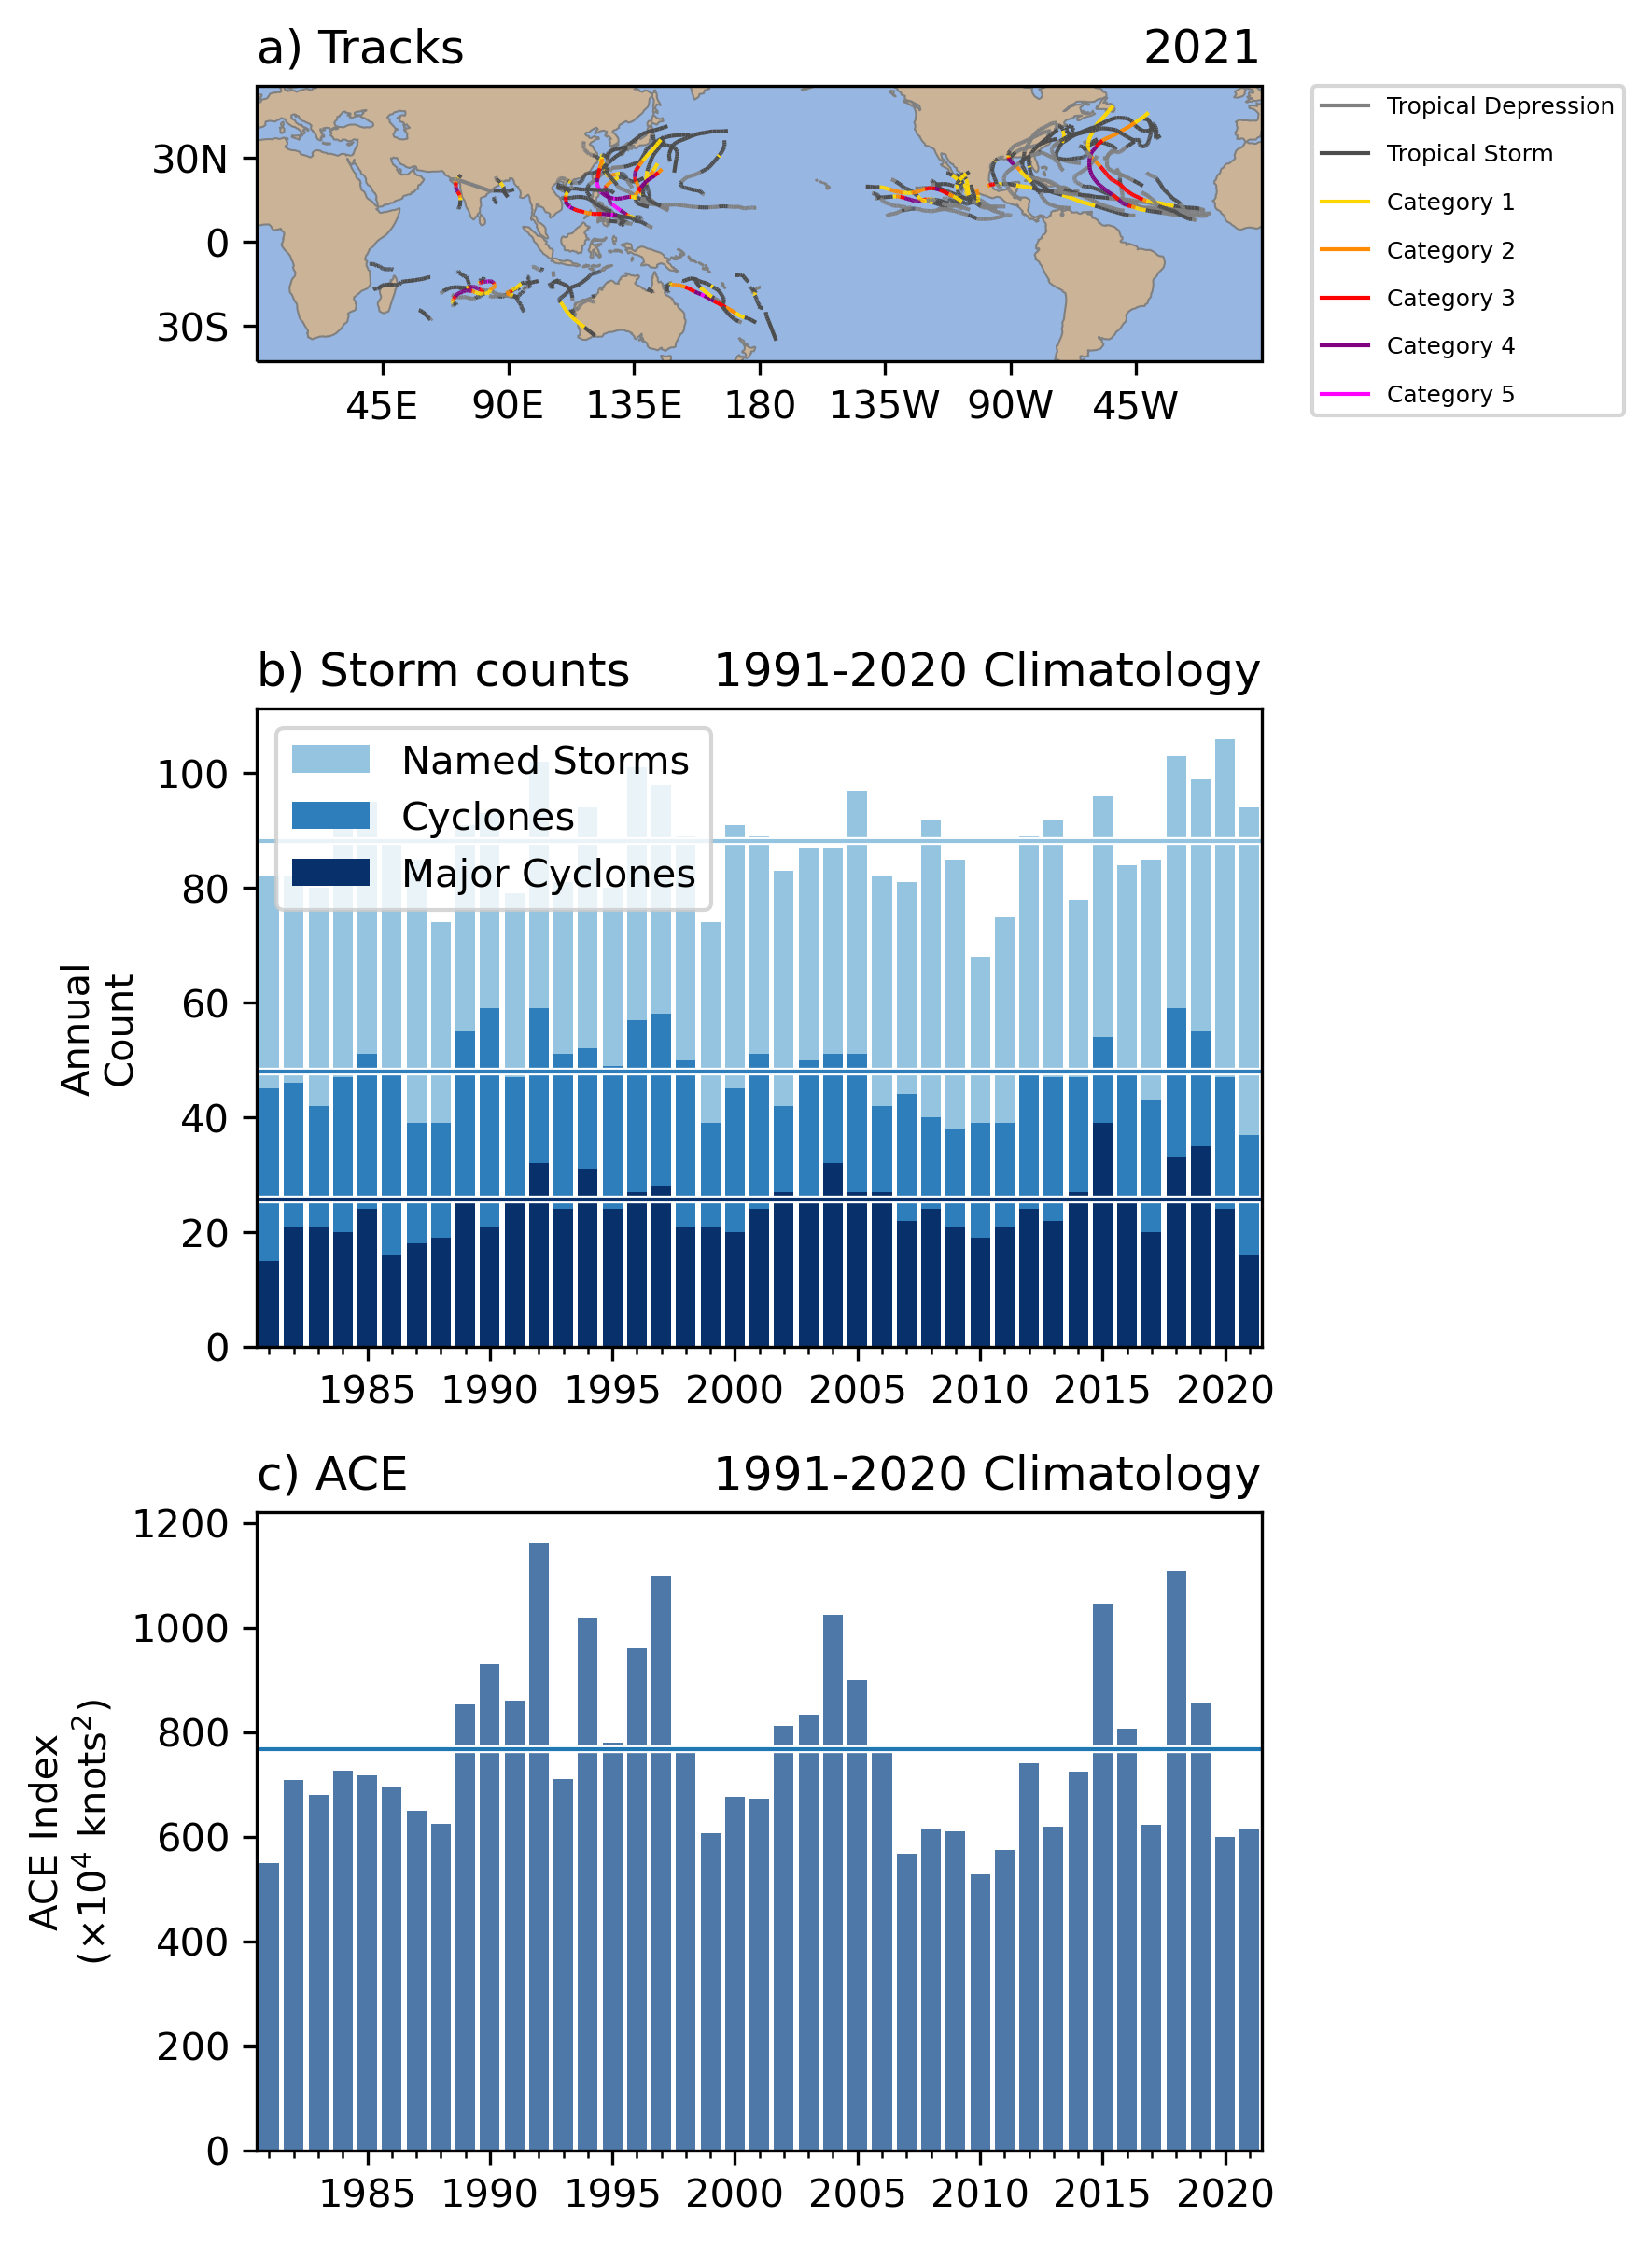 Map of 2021 global tropical cyclone tracks and annual statistics for global tropical cyclone activity. Horizontal lines represent the 1991-2020 climatology.